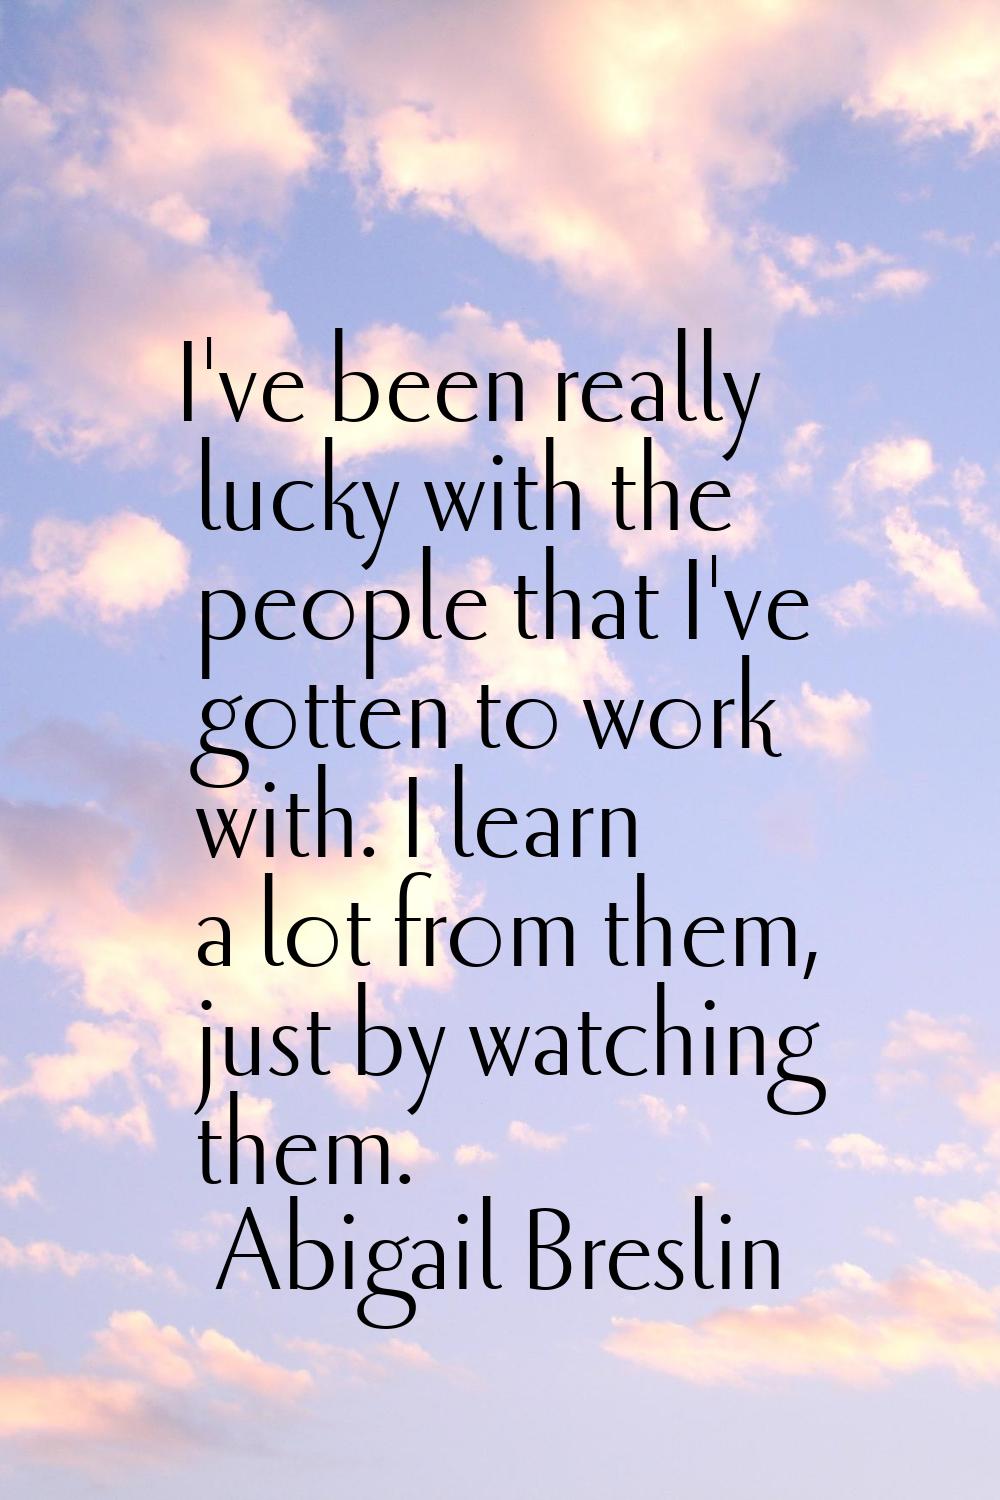 I've been really lucky with the people that I've gotten to work with. I learn a lot from them, just